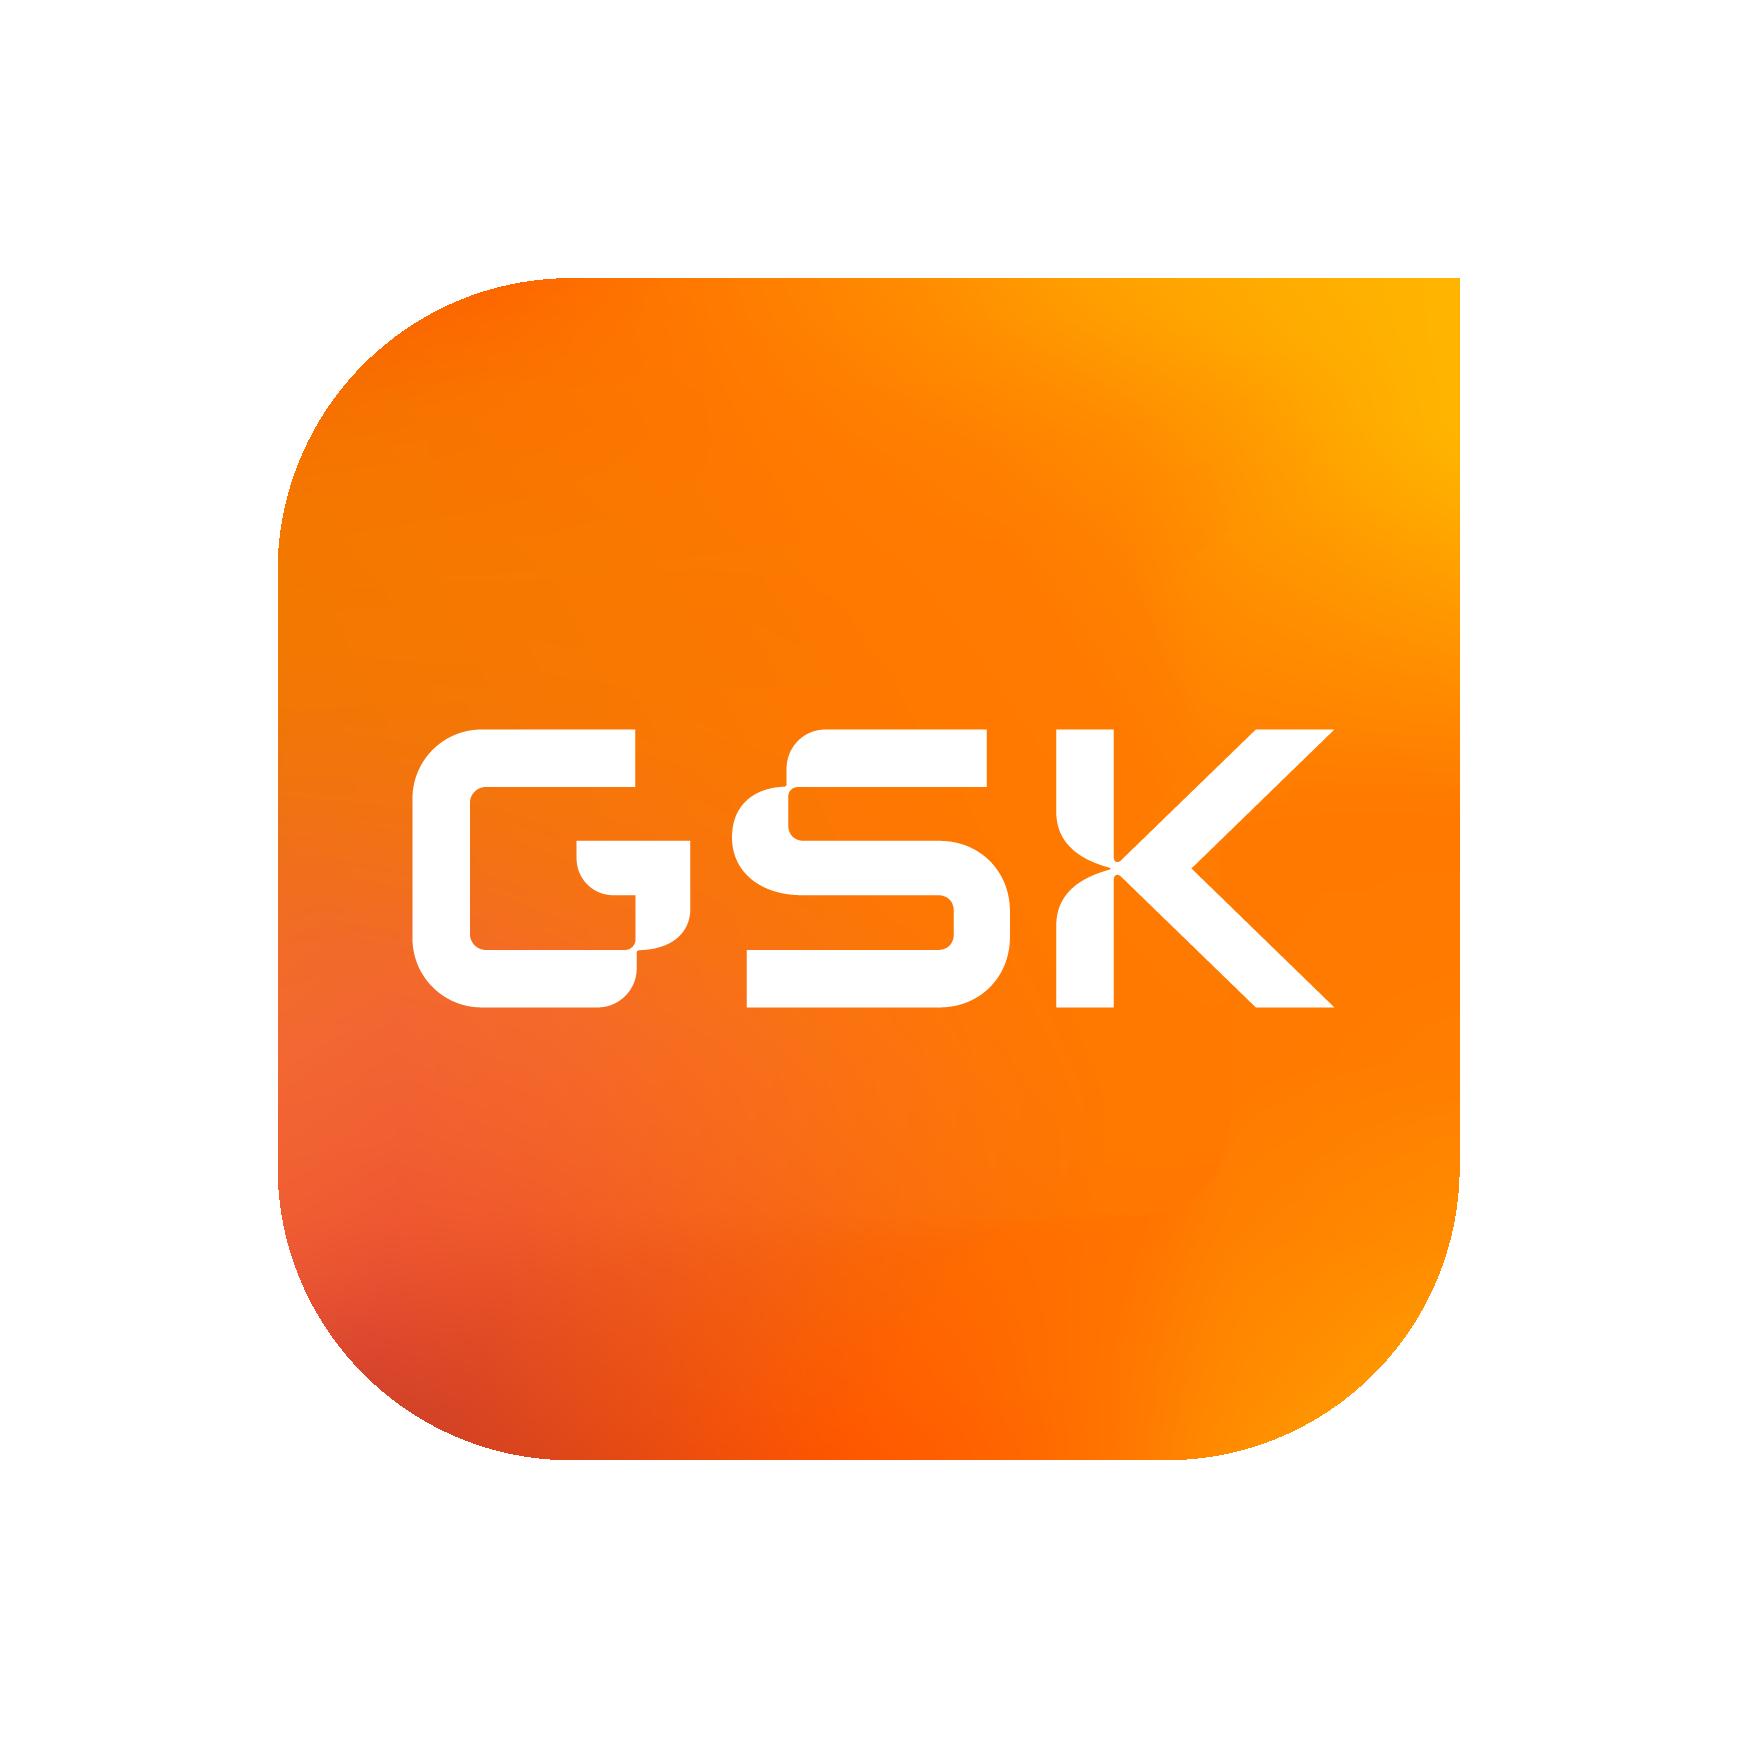 gsk_signal_full_colour_rgb.png